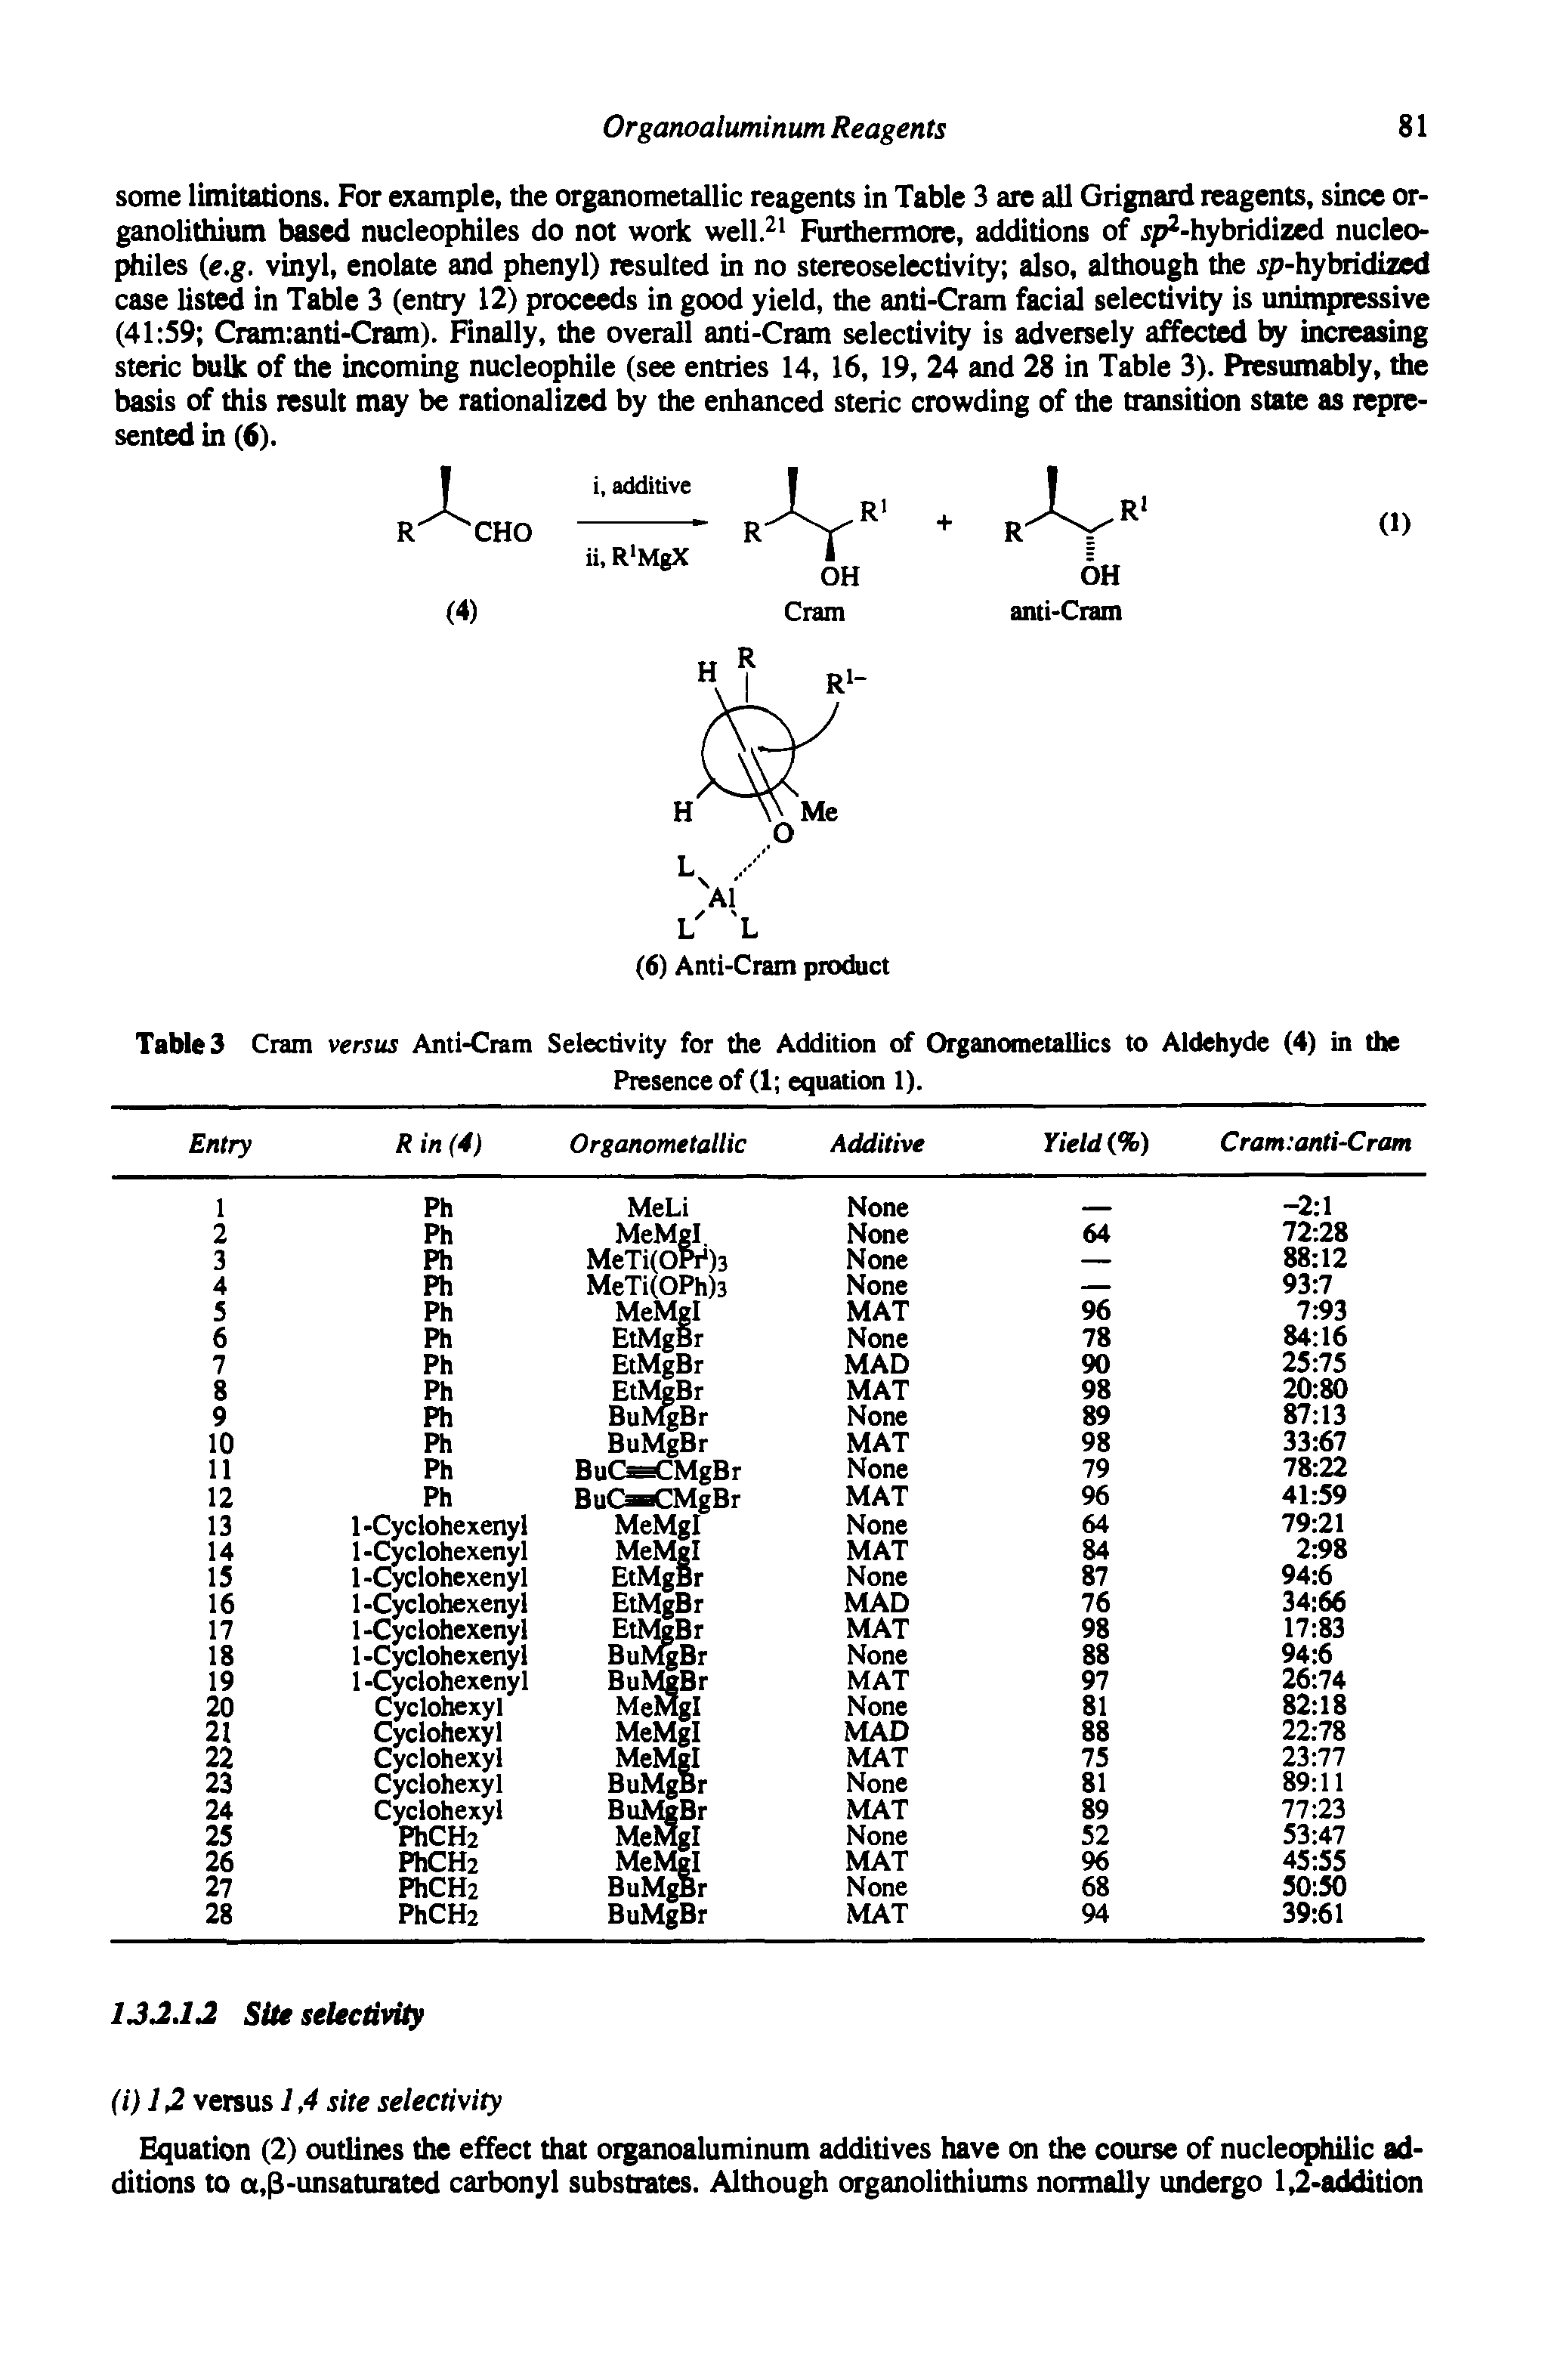 Tables Cram versus Anti-Cram Selectivity for the Addition of Organometallics to Aldehyde (4) in the...